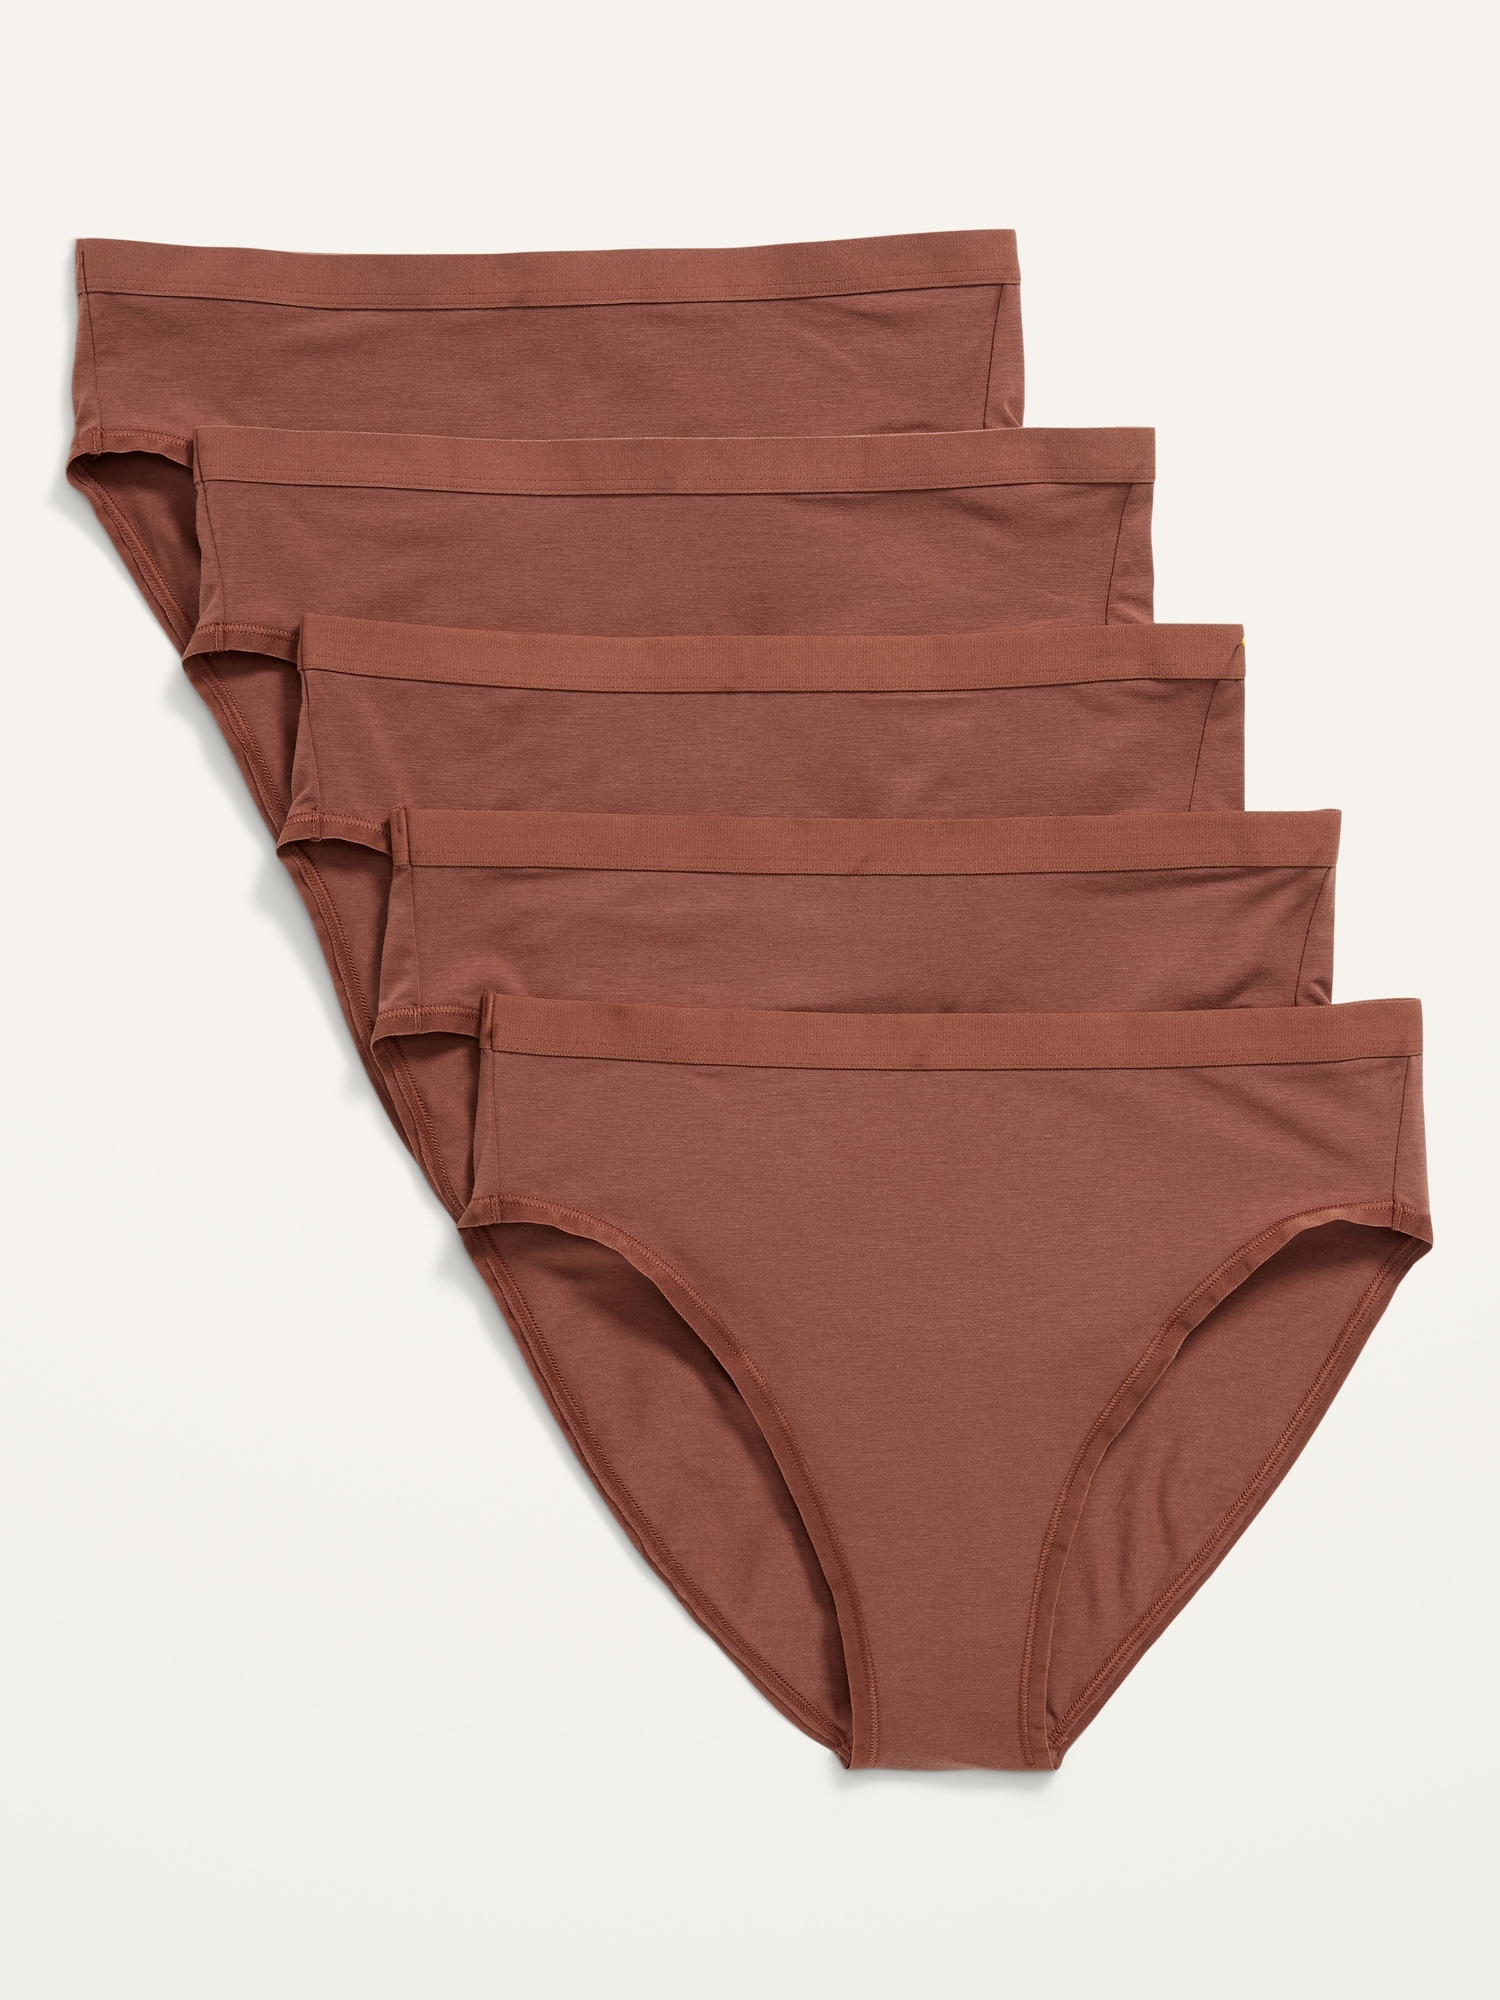 Unbranded Solid Regular Size XS Panties for Women for sale